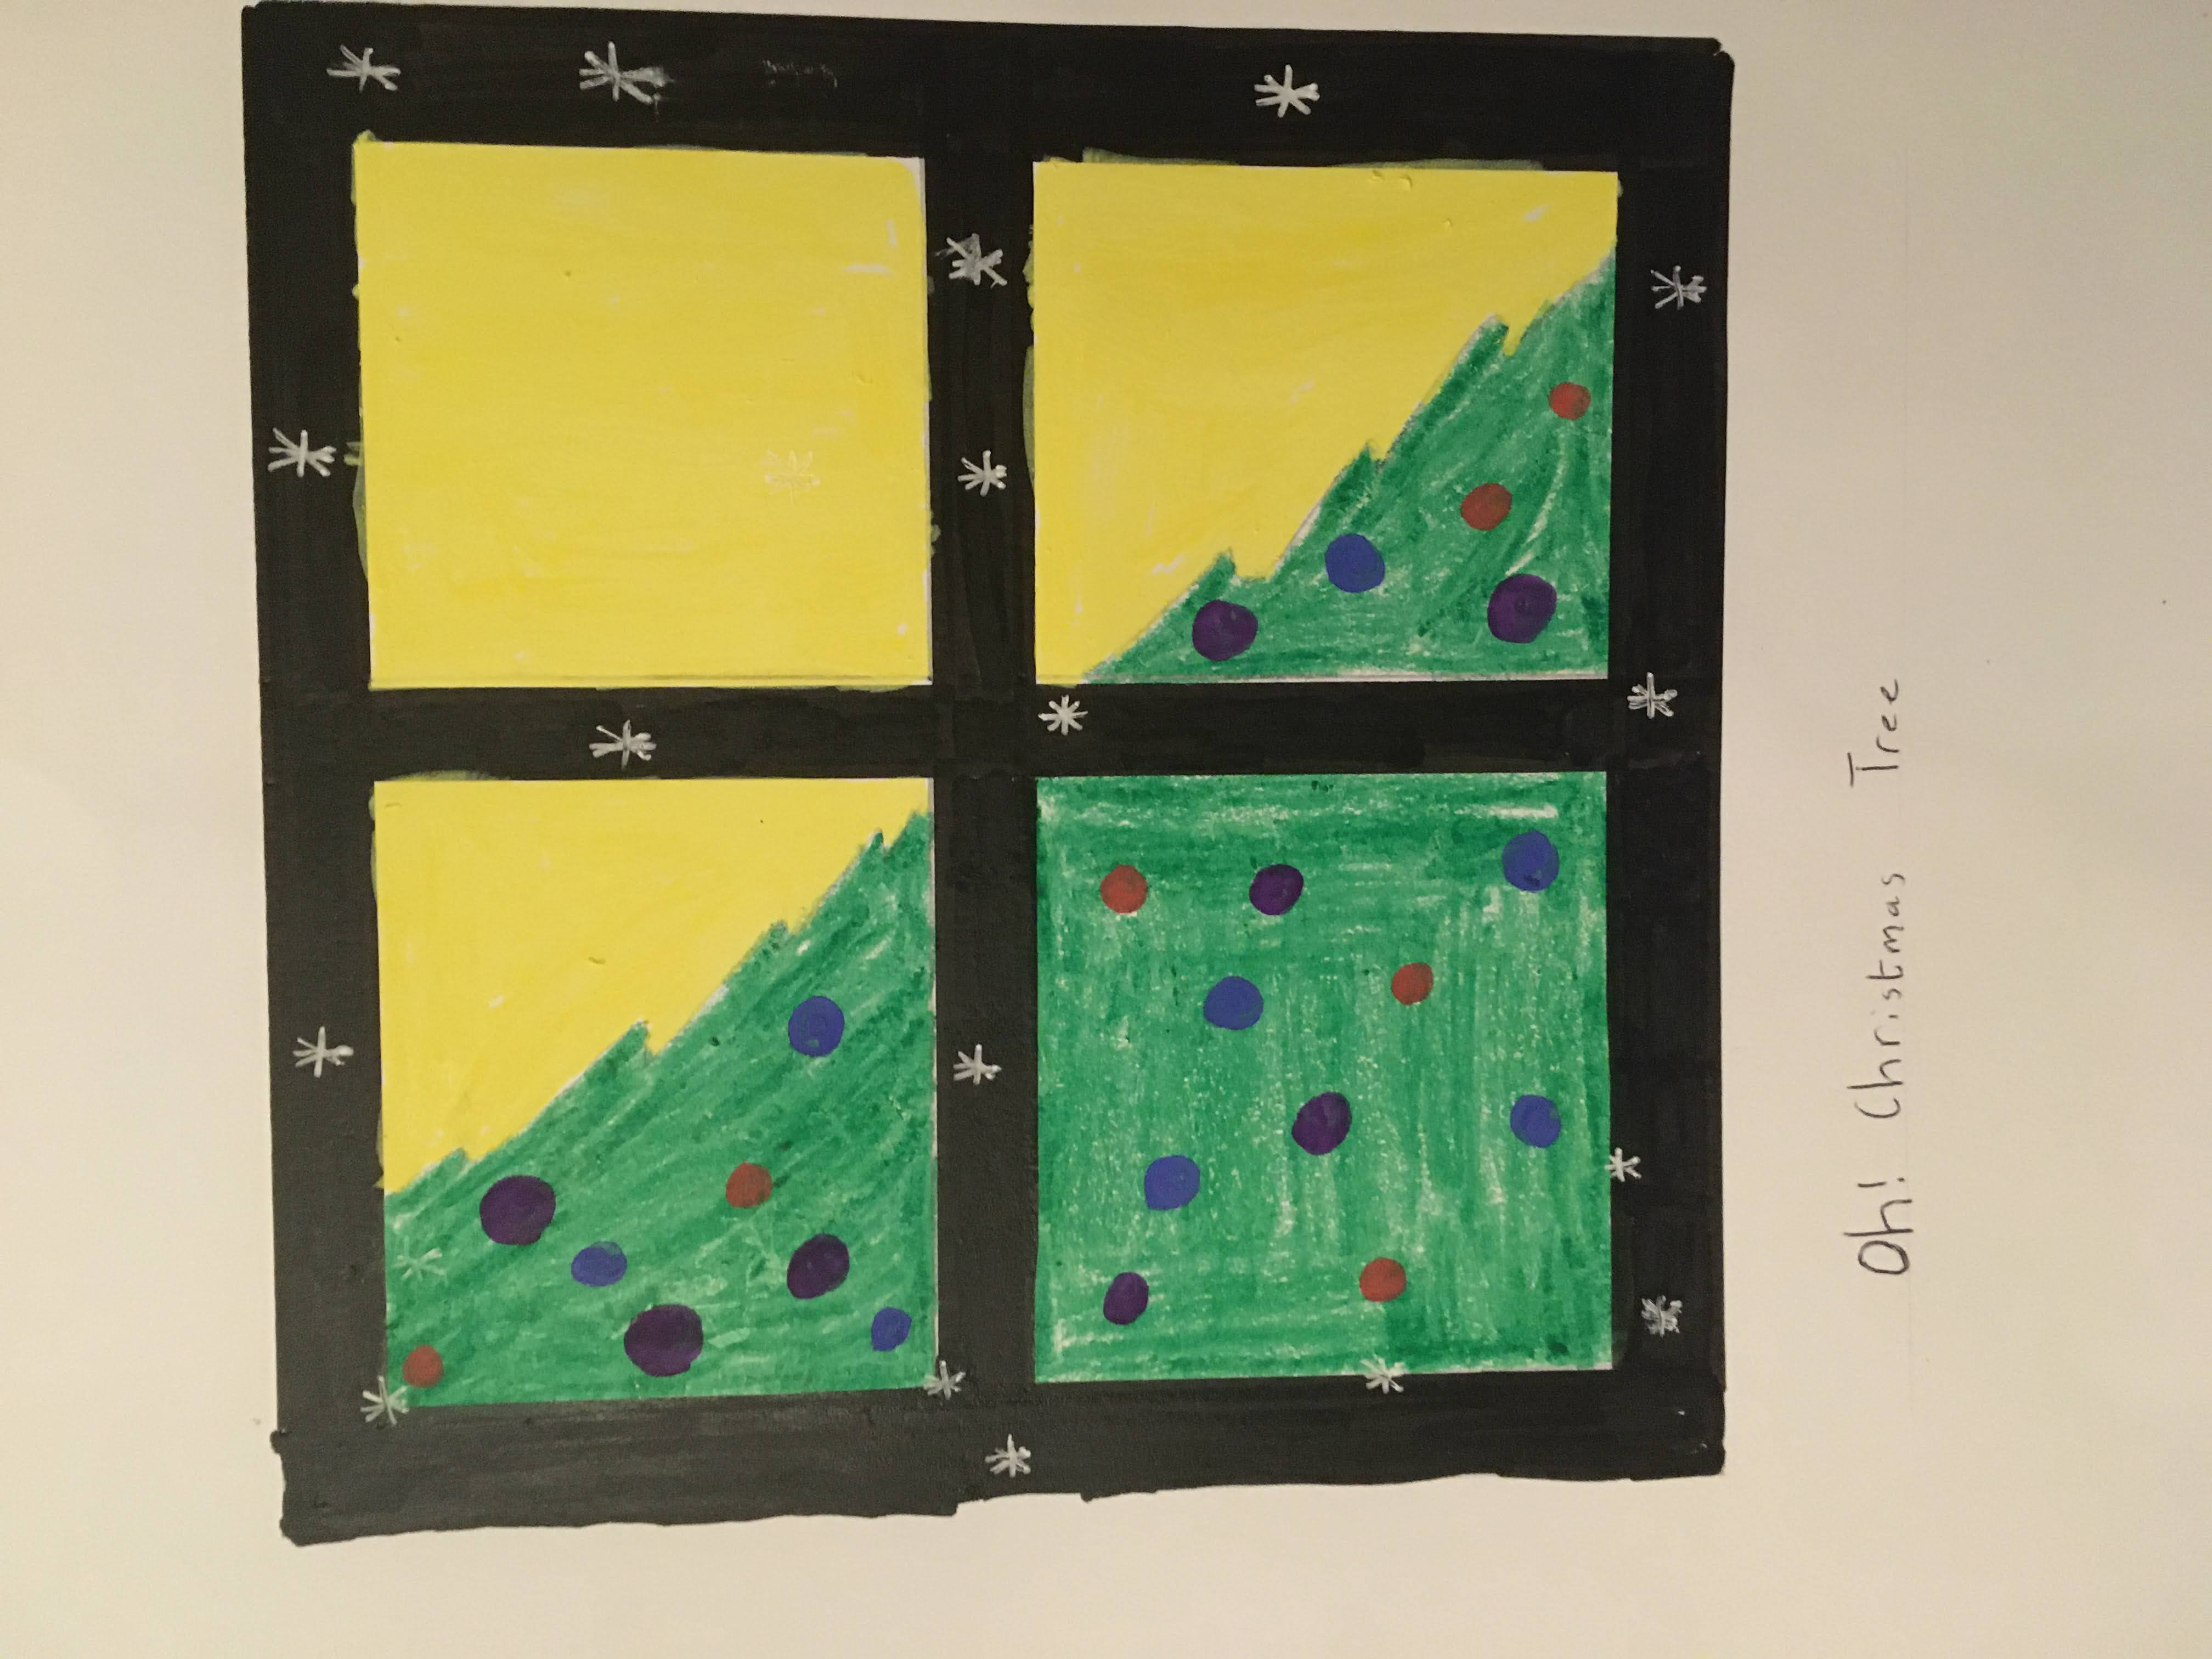 'Oh Christmas Tree' by Eimear (10) from Louth